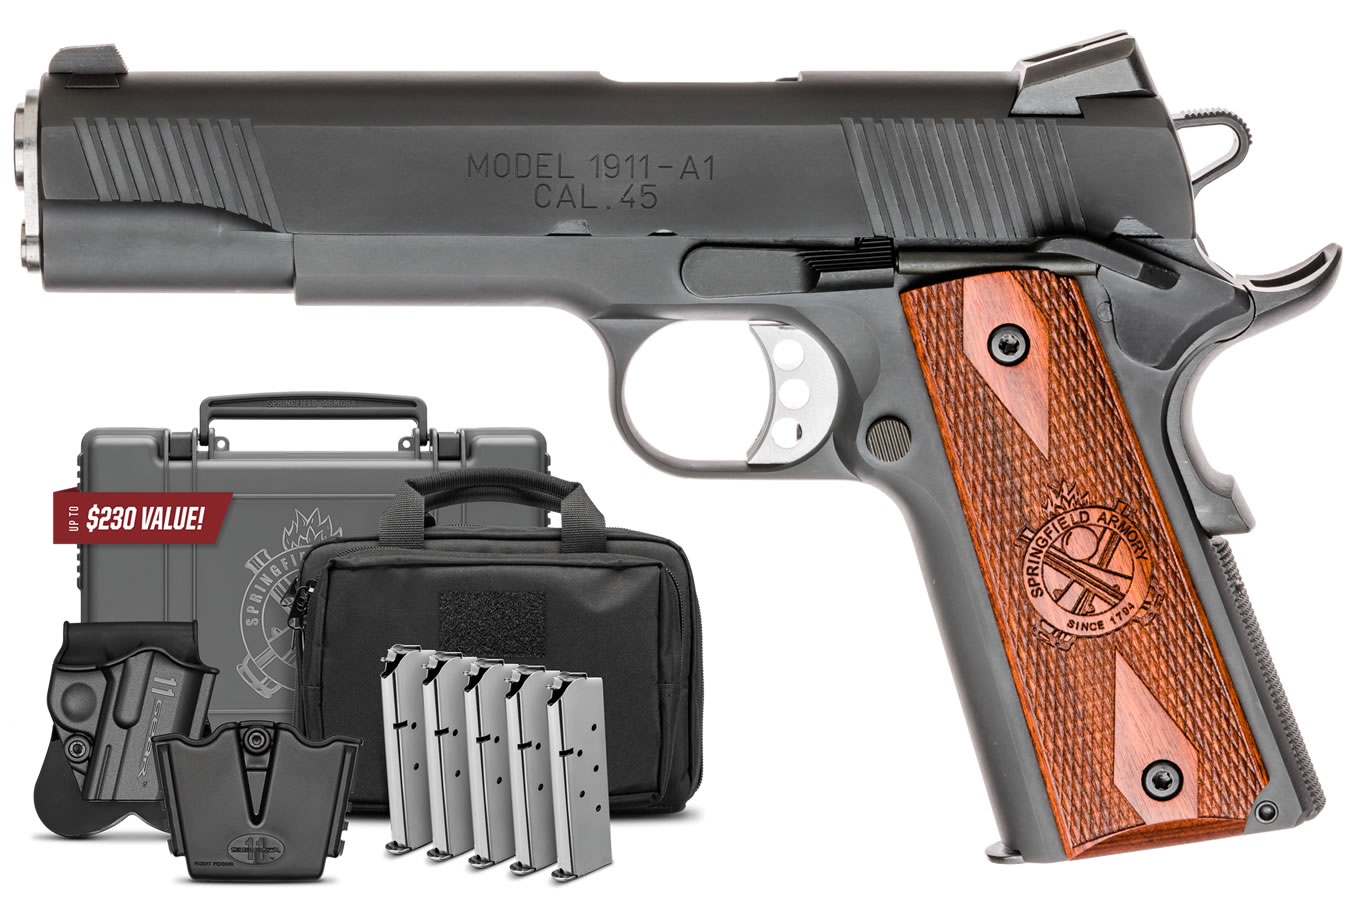 SPRINGFIELD 1911 LOADED 45 ACP GEAR UP PACKAGE 5 IN BBL NIGHT SIGHTS PARKERIZED FINISH